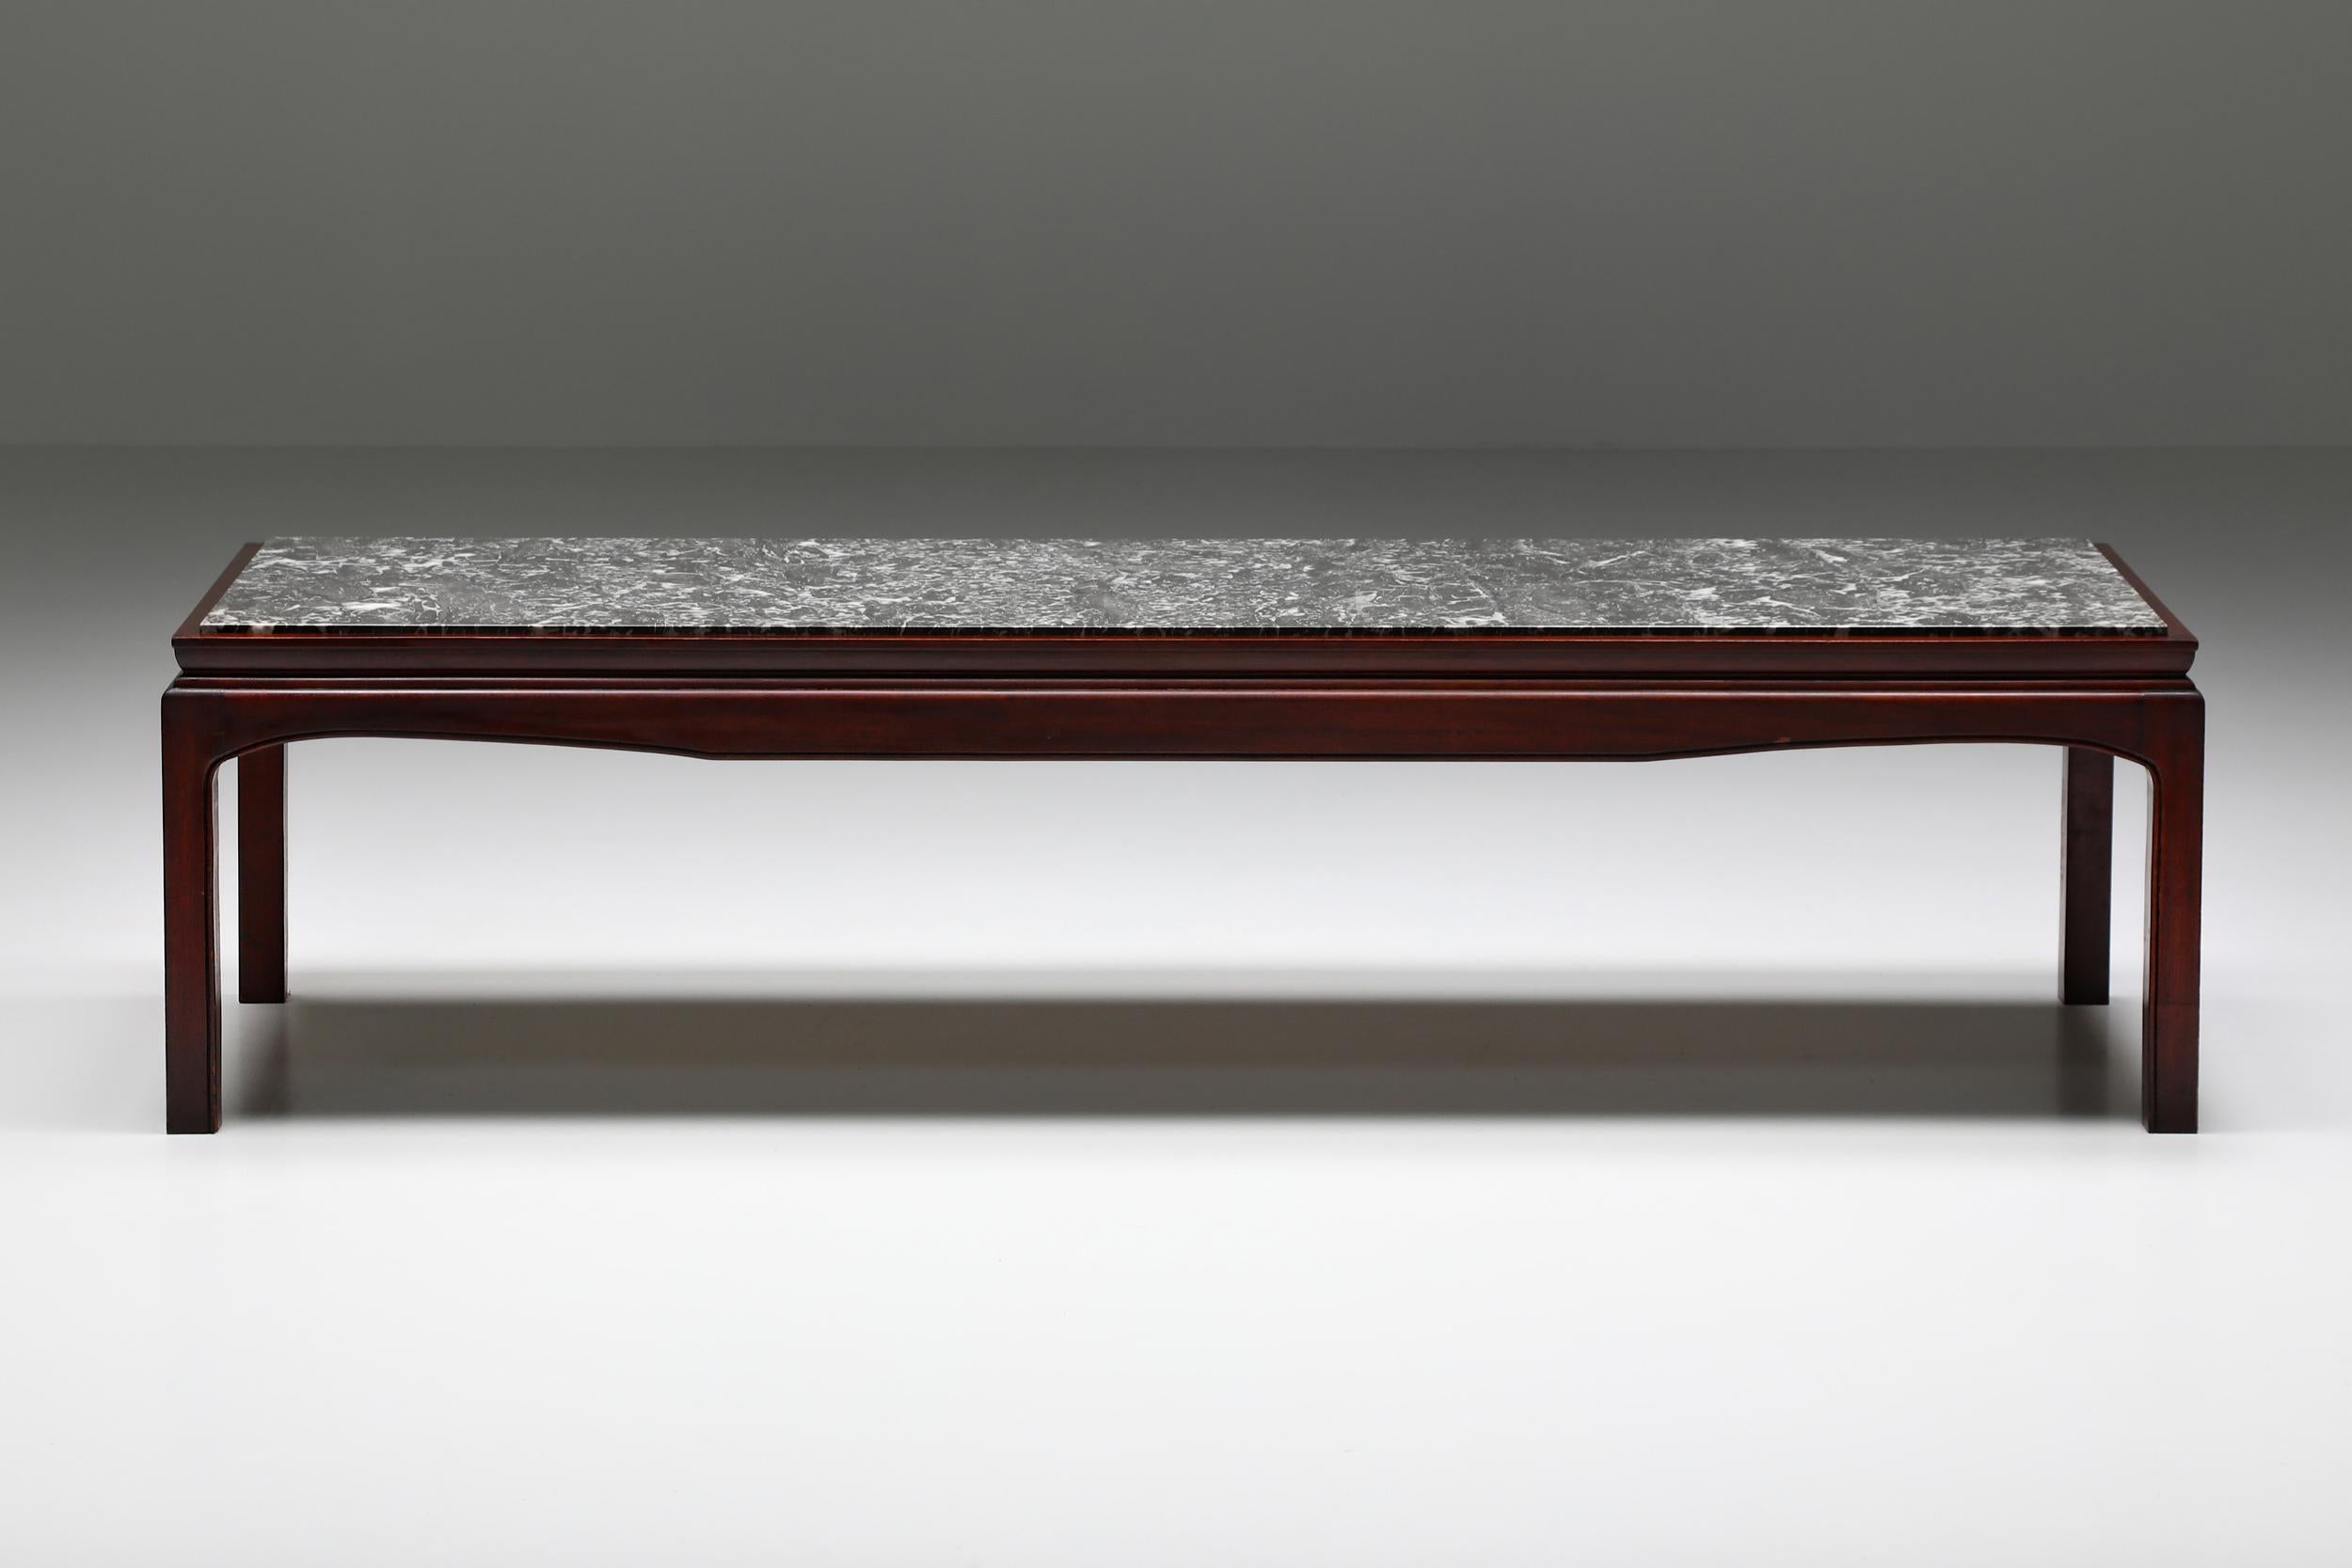 De Coene; Belgian design; Craftsmanship; Marble; Mahogany; Coffee table; Japanoiserie style; Mid-Century Modern, 1950's

De Coene mahogany and marble coffee table created in Belgium in circa 1950. The rich materials and Japanoiserie and Art Deco